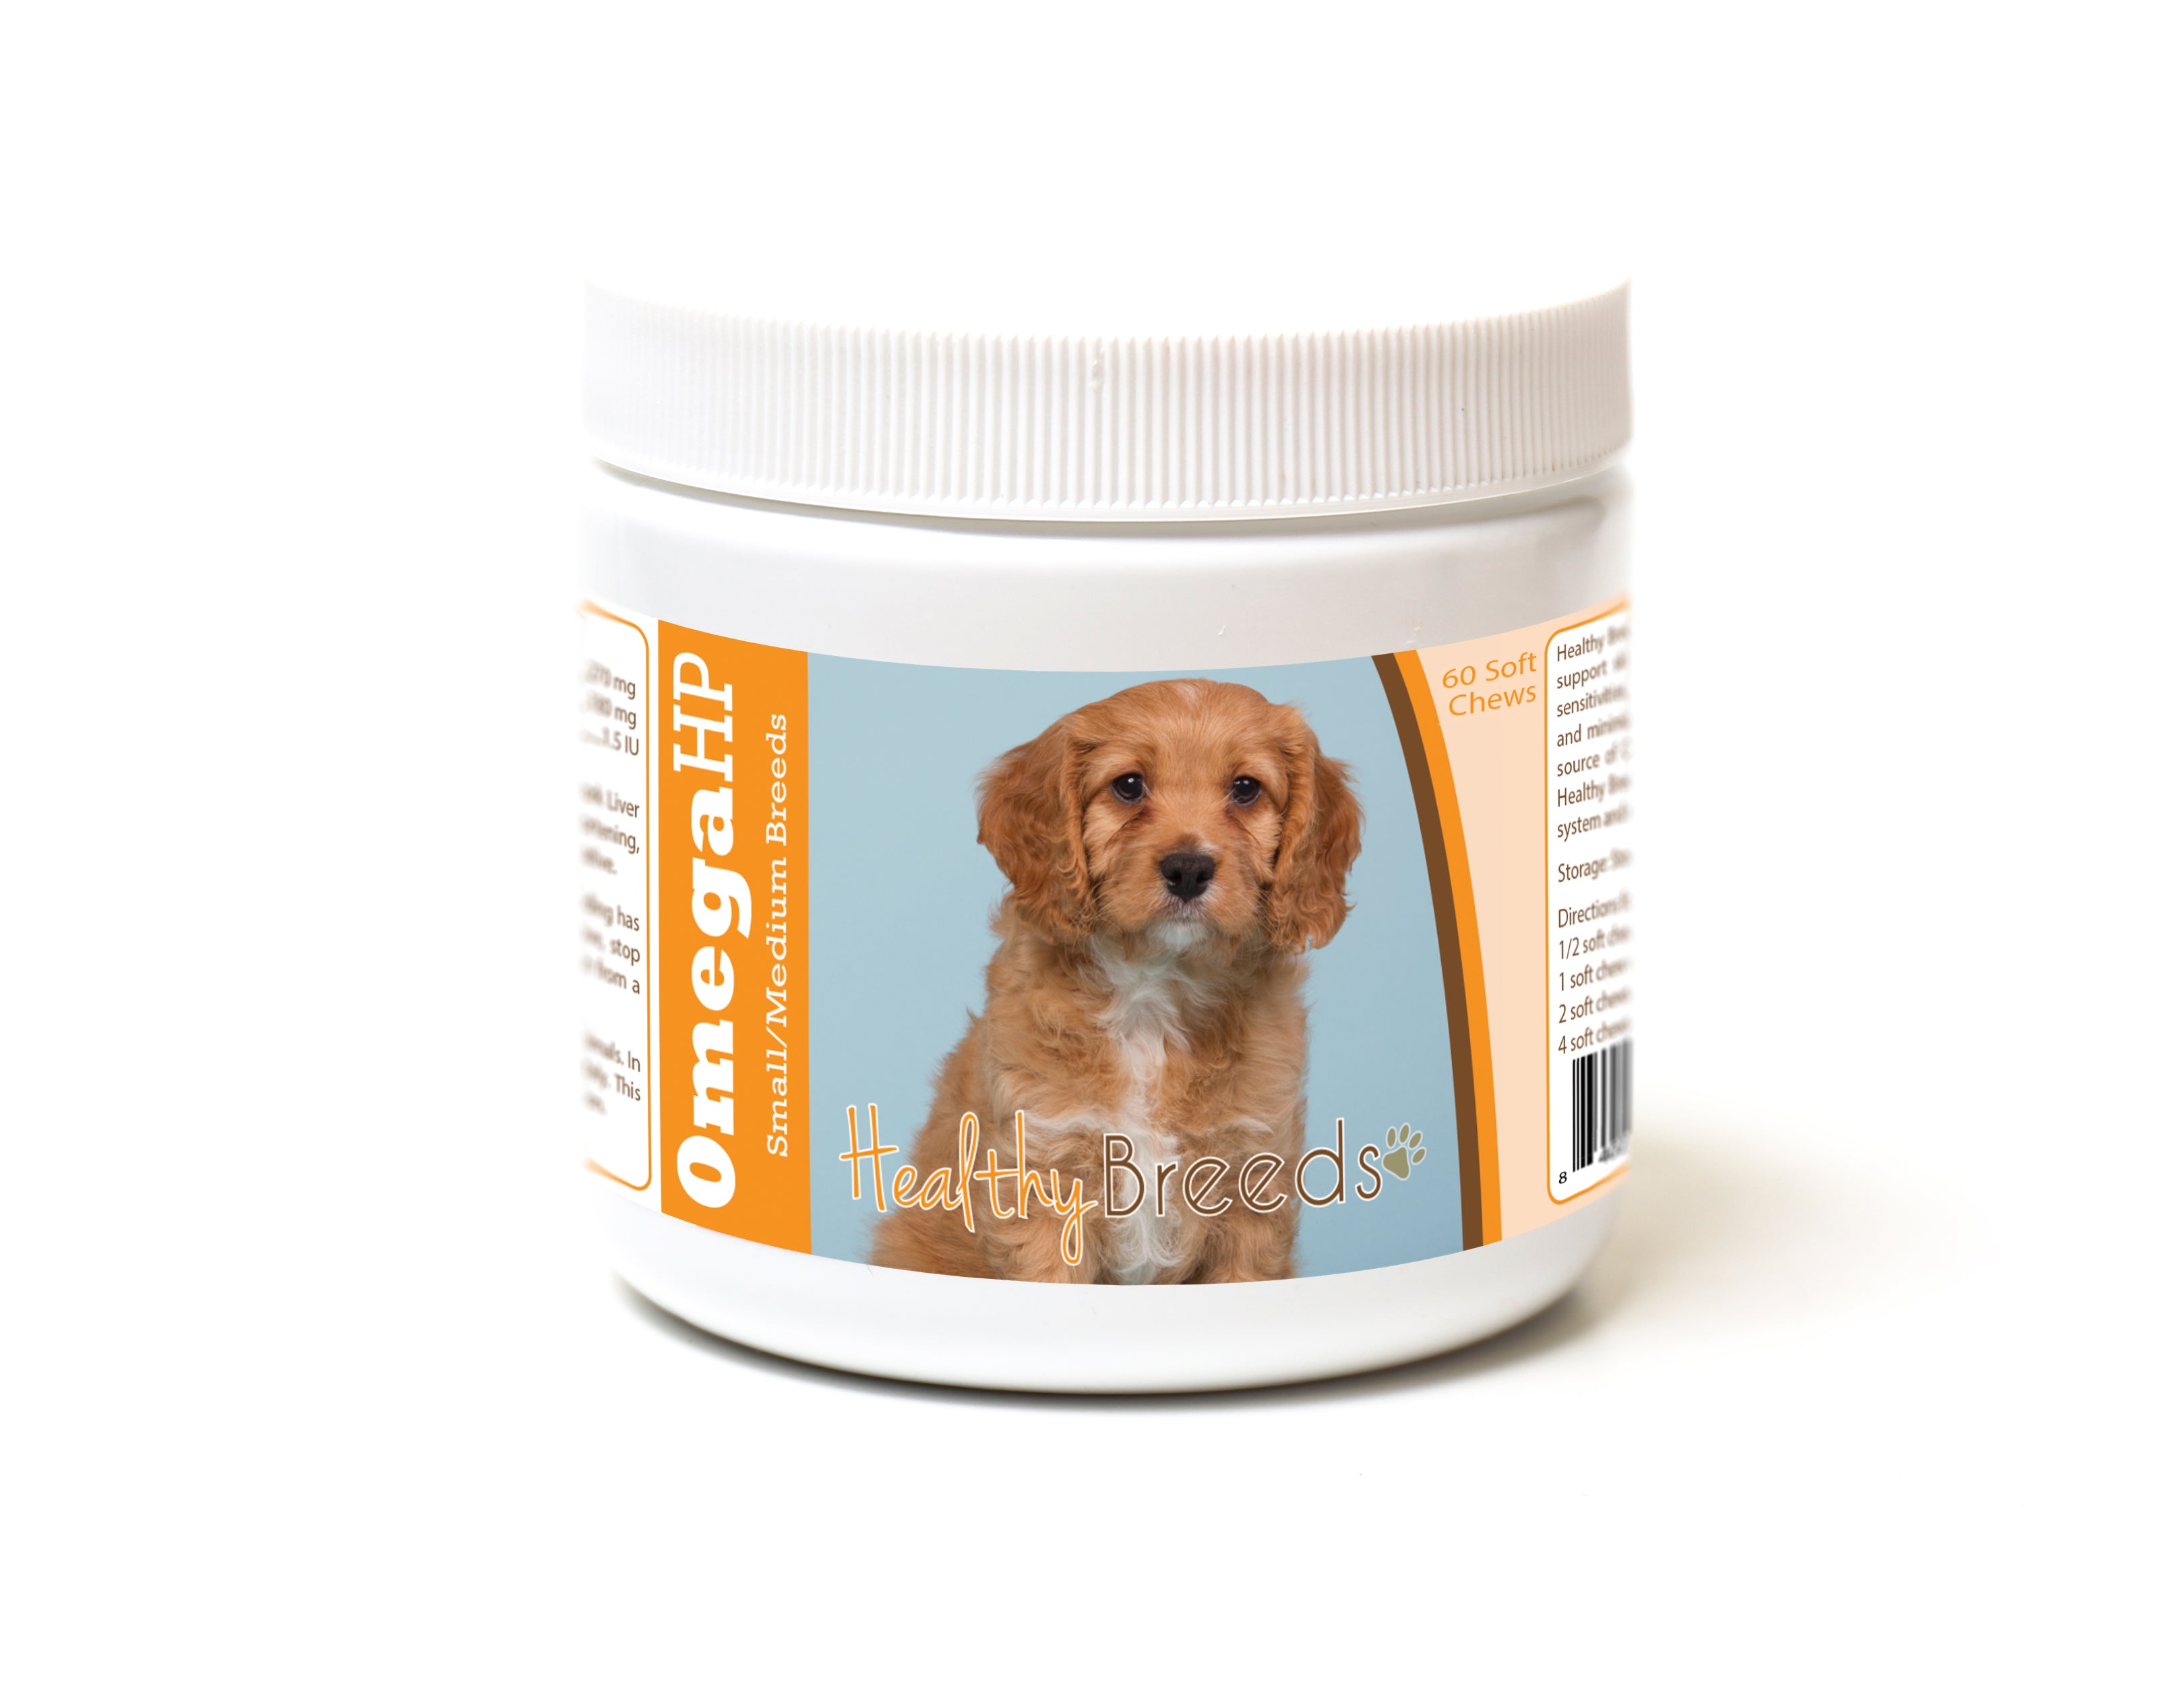 Cavapoo Omega HP Fatty Acid Skin and Coat Support Soft Chews 60 Count